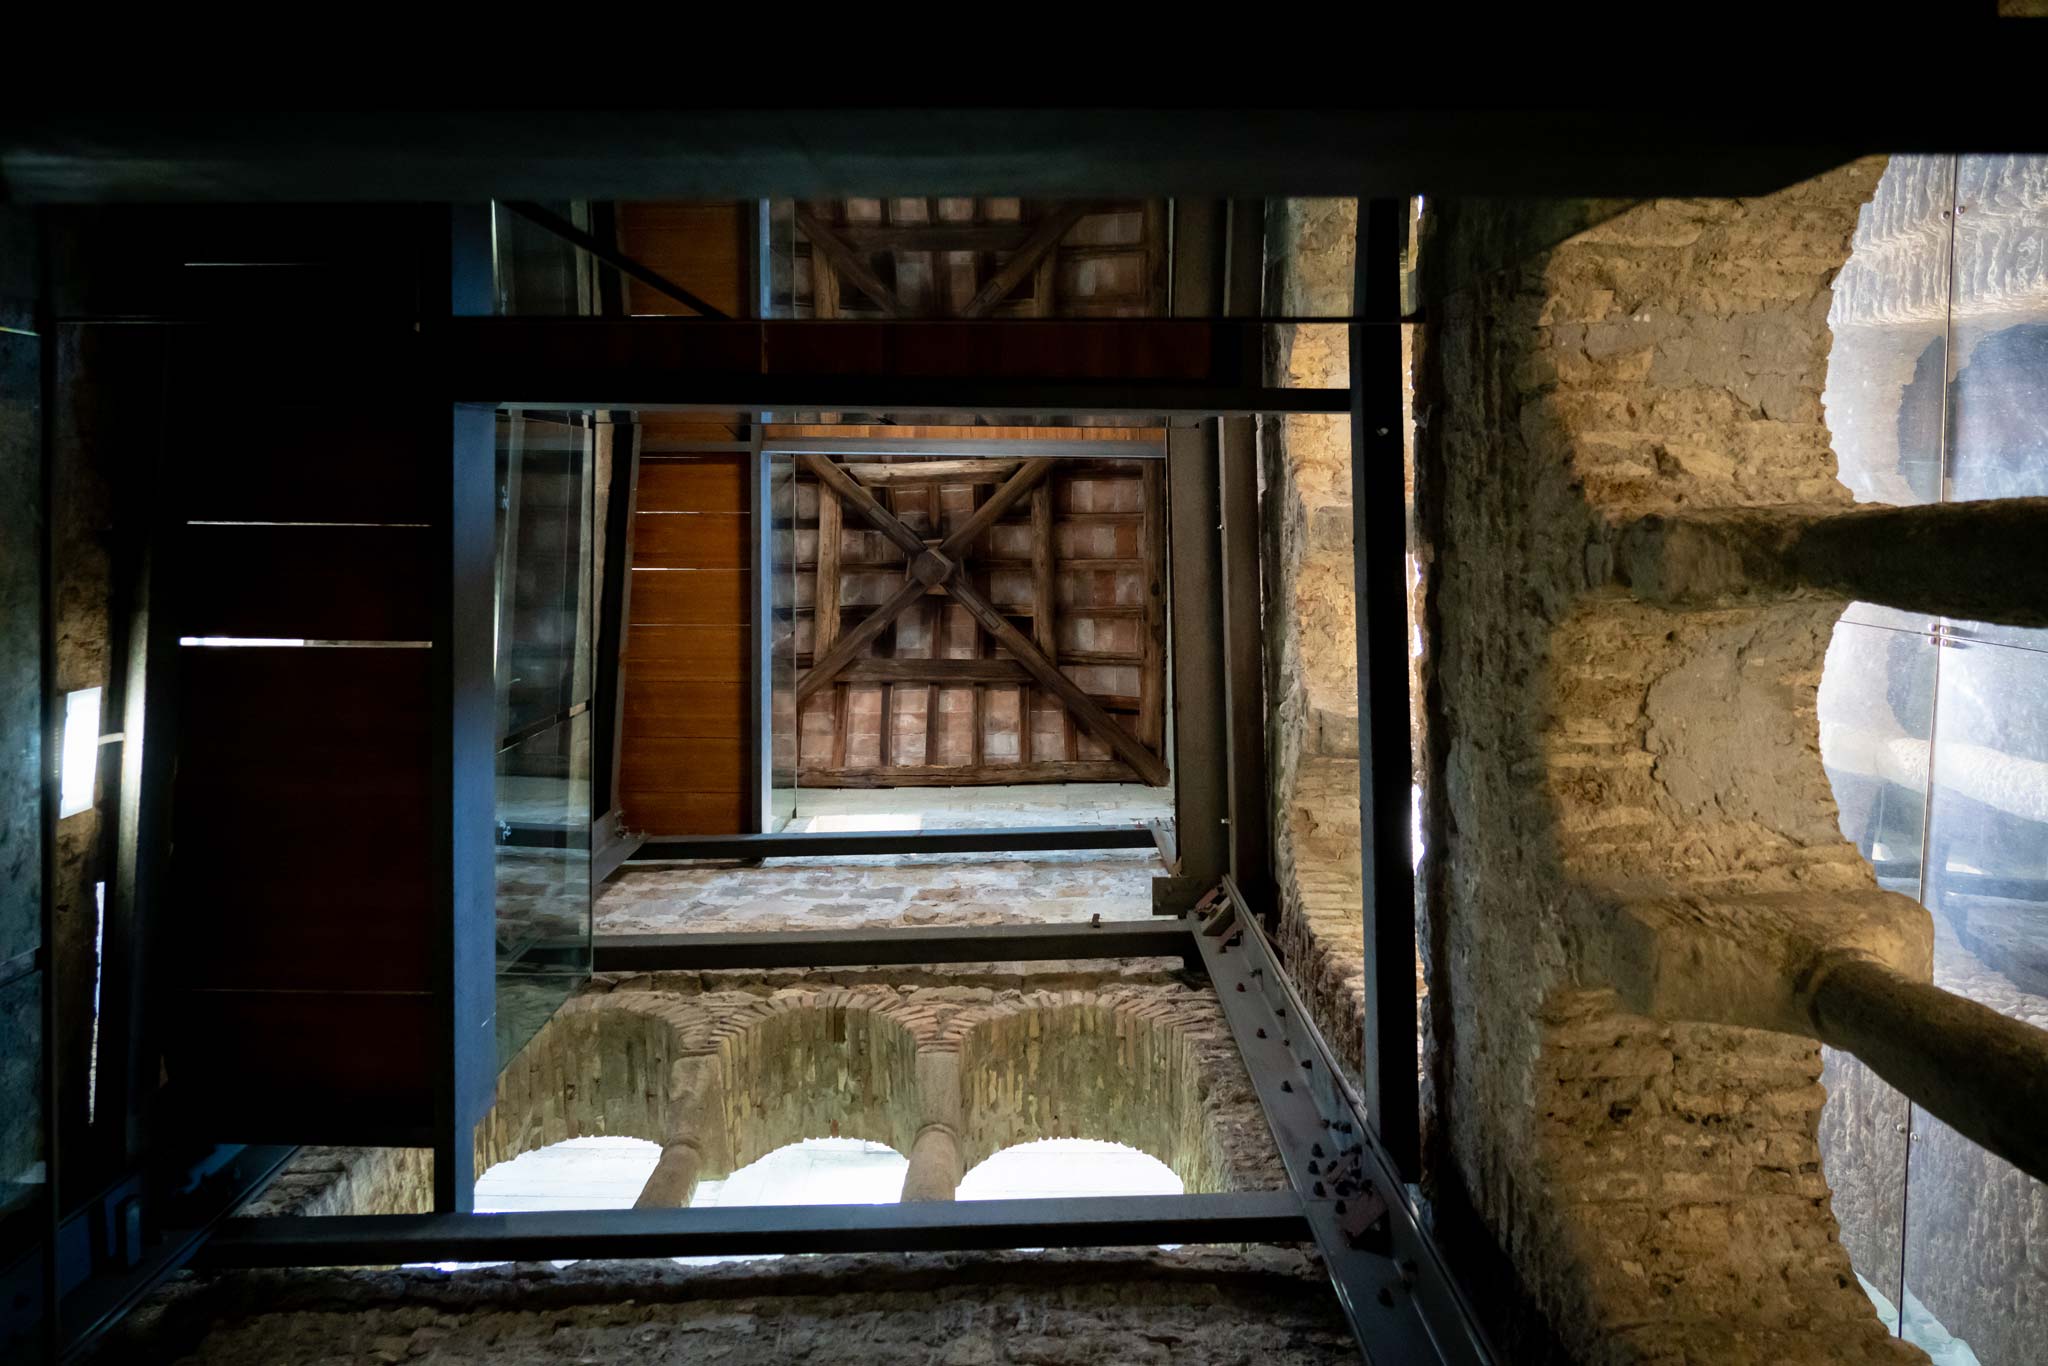 Inside the 'forgotten' bell tower of a village near Rome